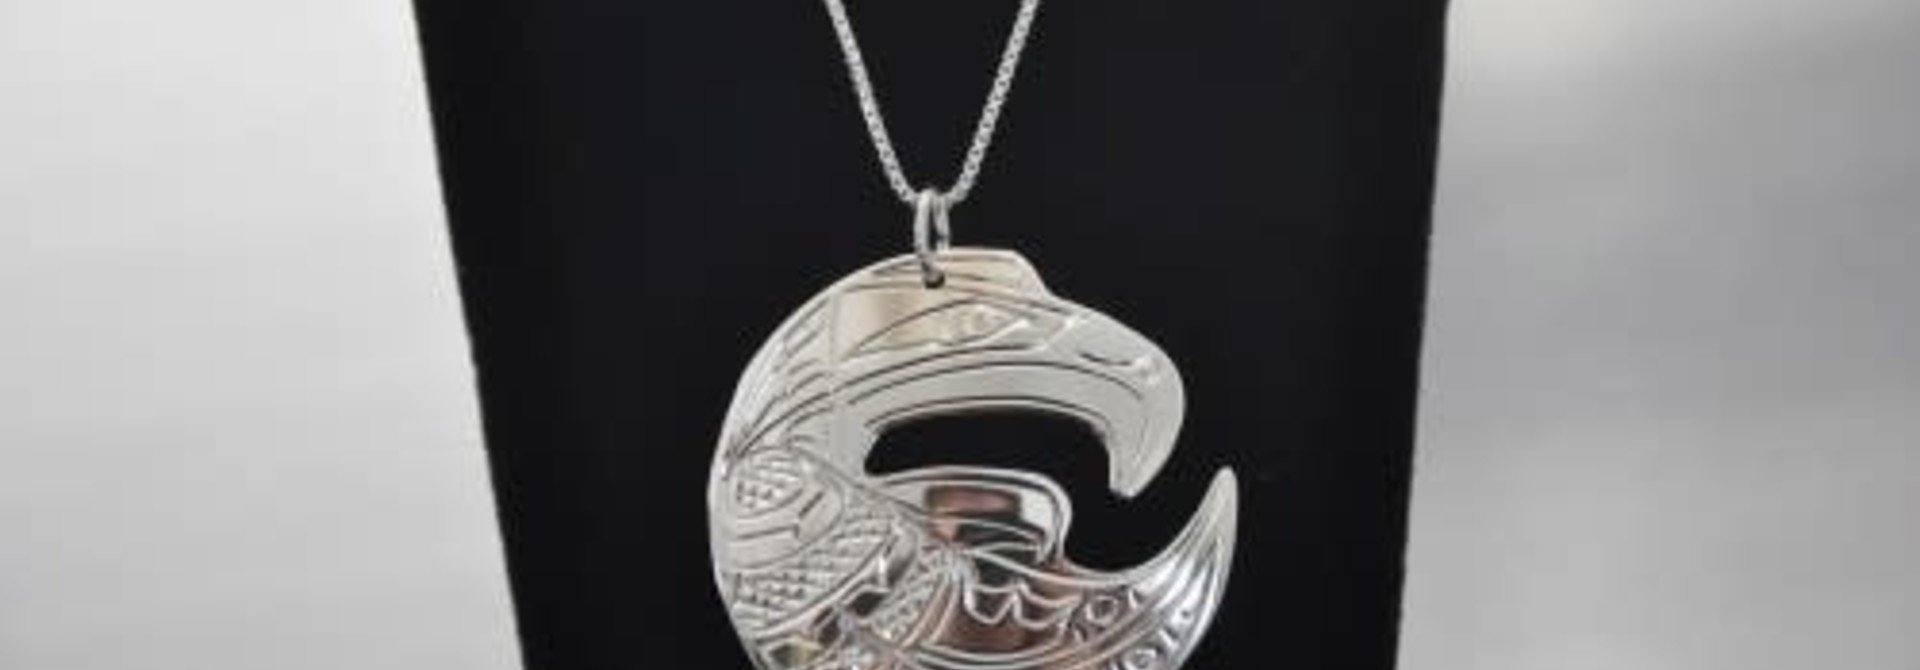 Hand Crafted Silver Eagle Pendant - 20" Chain by Nancy Dawson